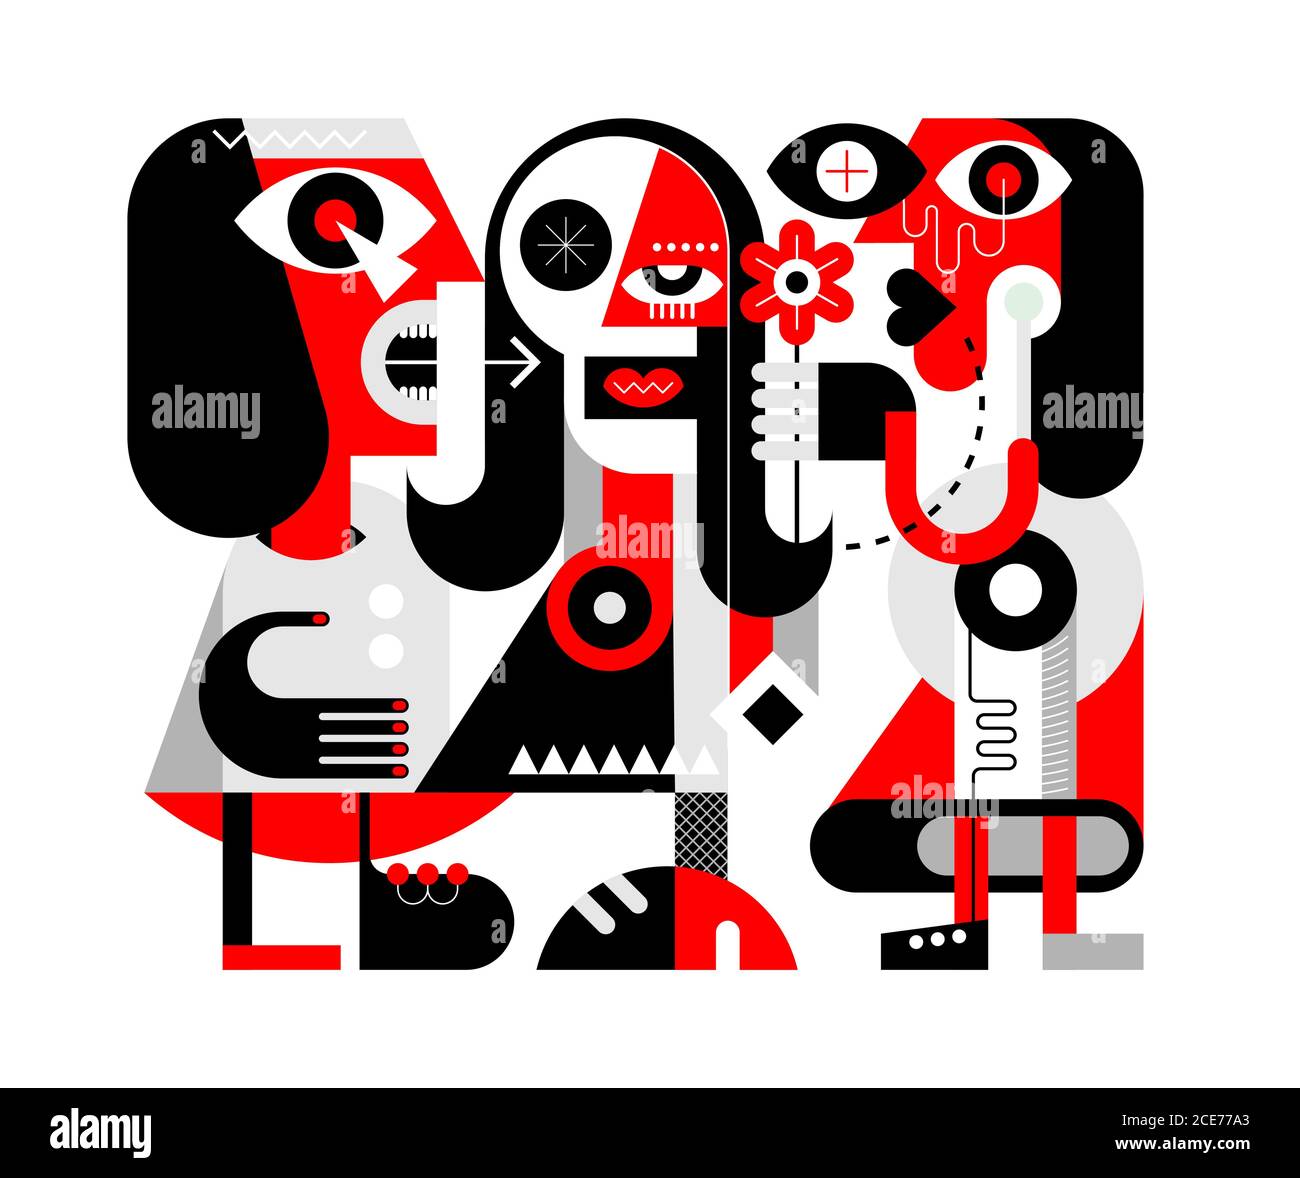 A woman gives a flower to her friend. A man nearby screams and shows aggression. Red, black and grey isolated on a white background Three People moder Stock Vector